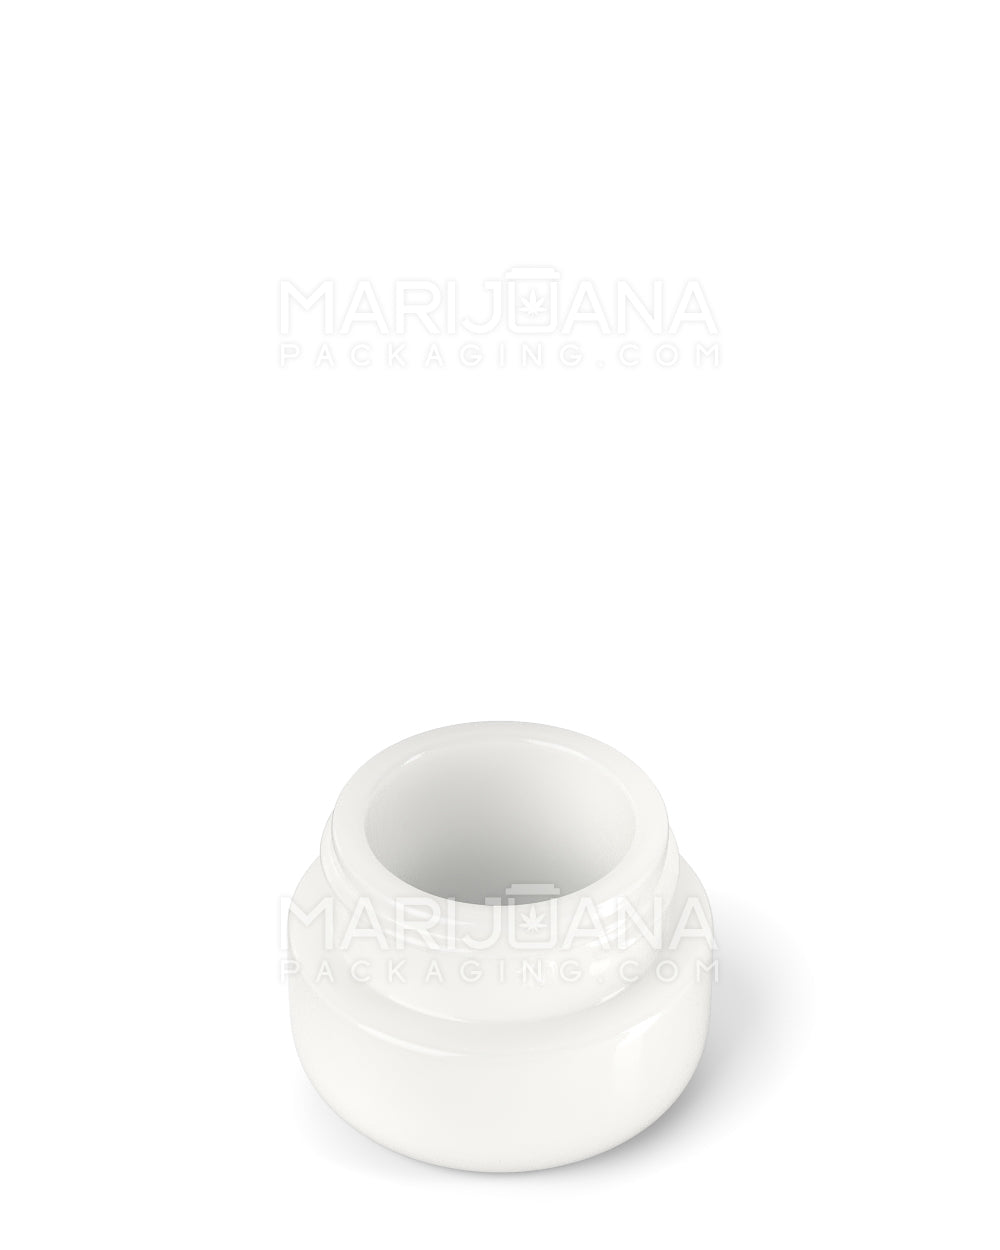 POLLEN GEAR | HiLine Glossy White Glass Concentrate Containers | 28mm - 5mL - 308 Count - 2